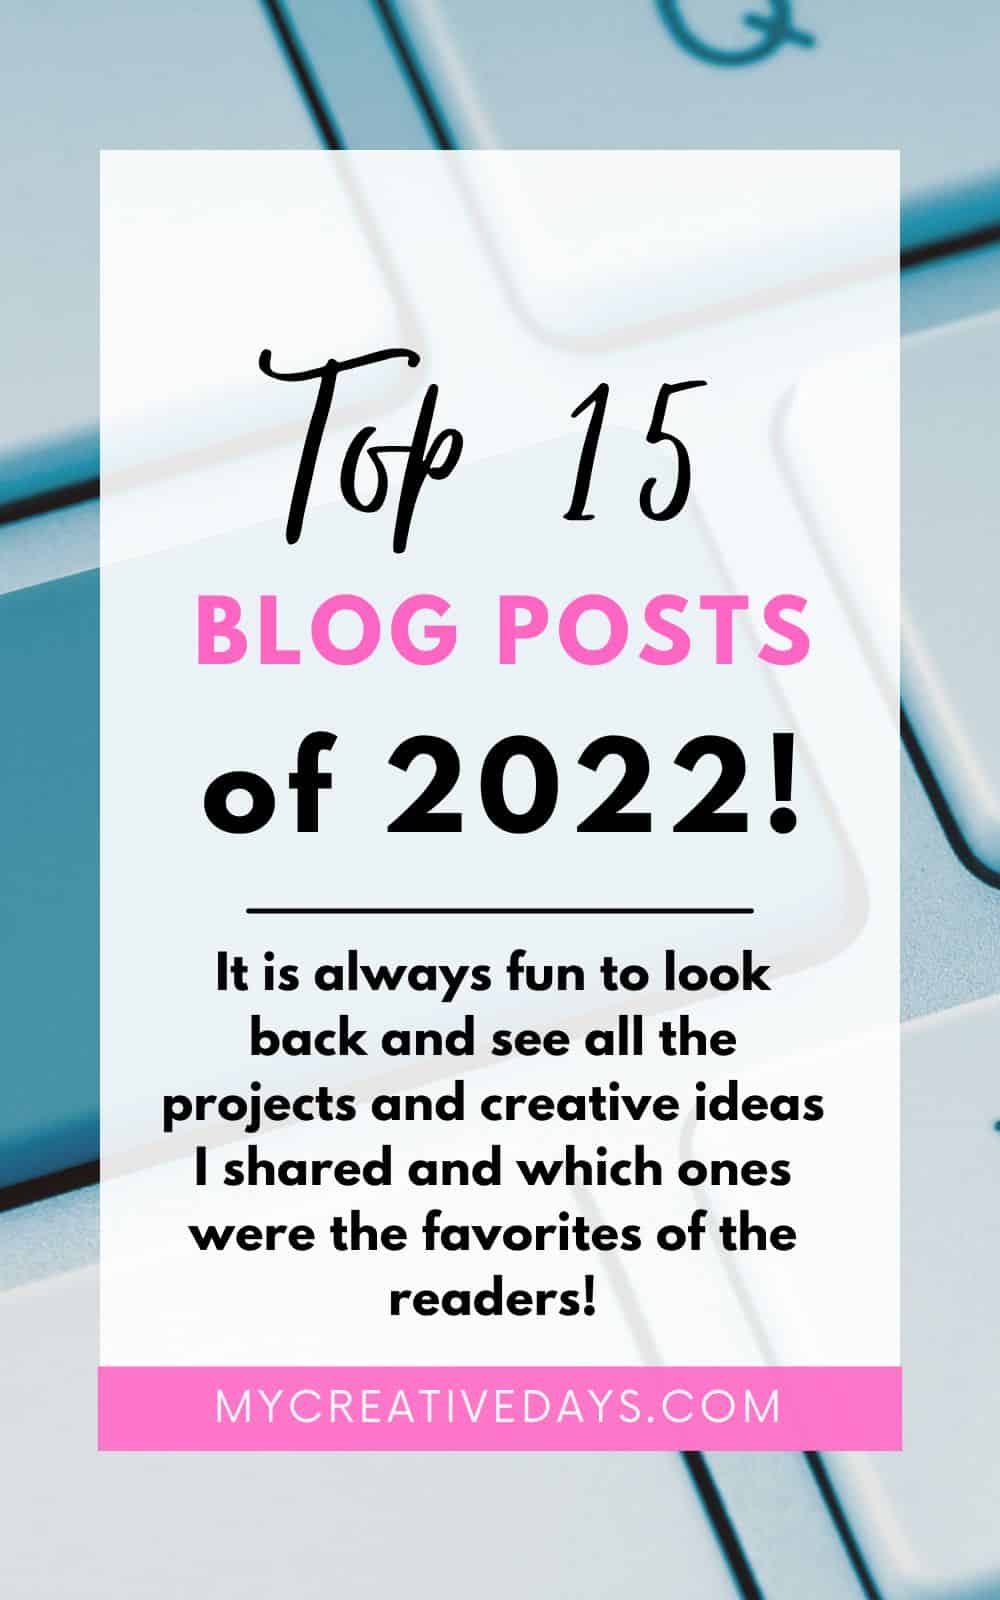 It is always fun to look back and see all the projects and creative ideas I shared. This post is the top 15 blog posts of 2022 for MCD.